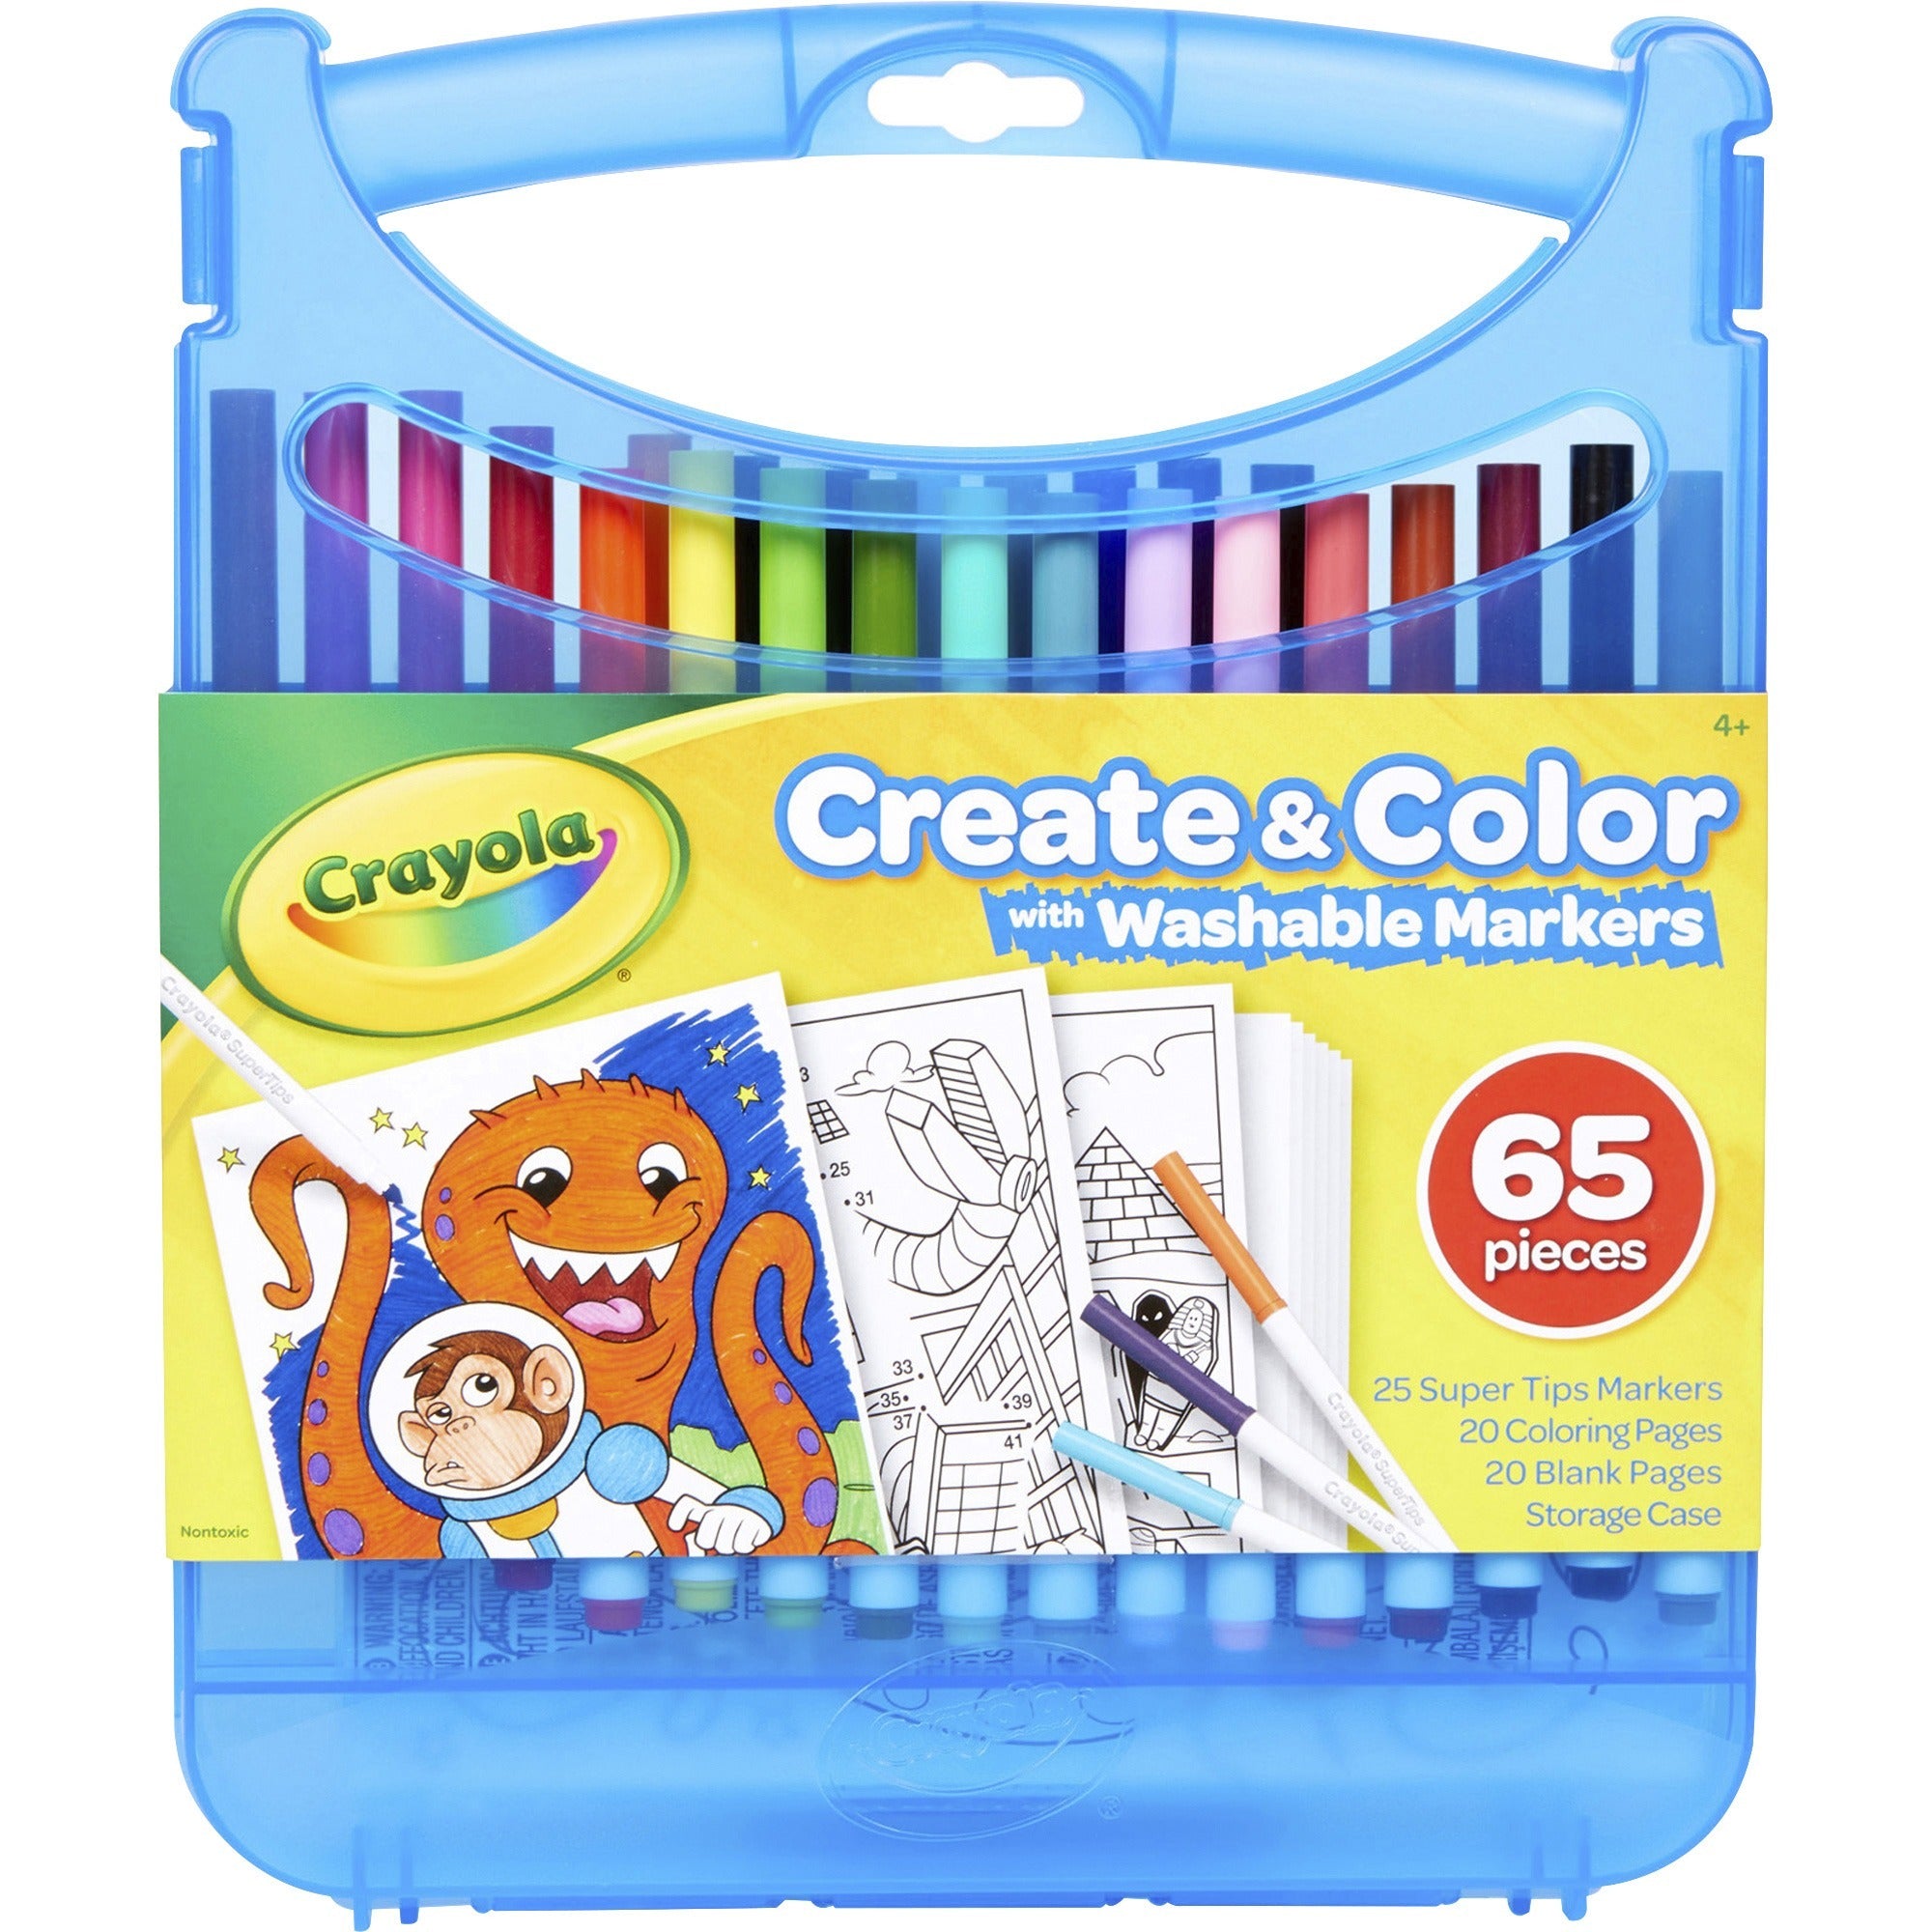 crayola-super-tips-art-kit-classroom-home-art-recommended-for-4-year-65-pieces-125height-x-925width-x-1130length-1-kit-assorted_cyo040377 - 2